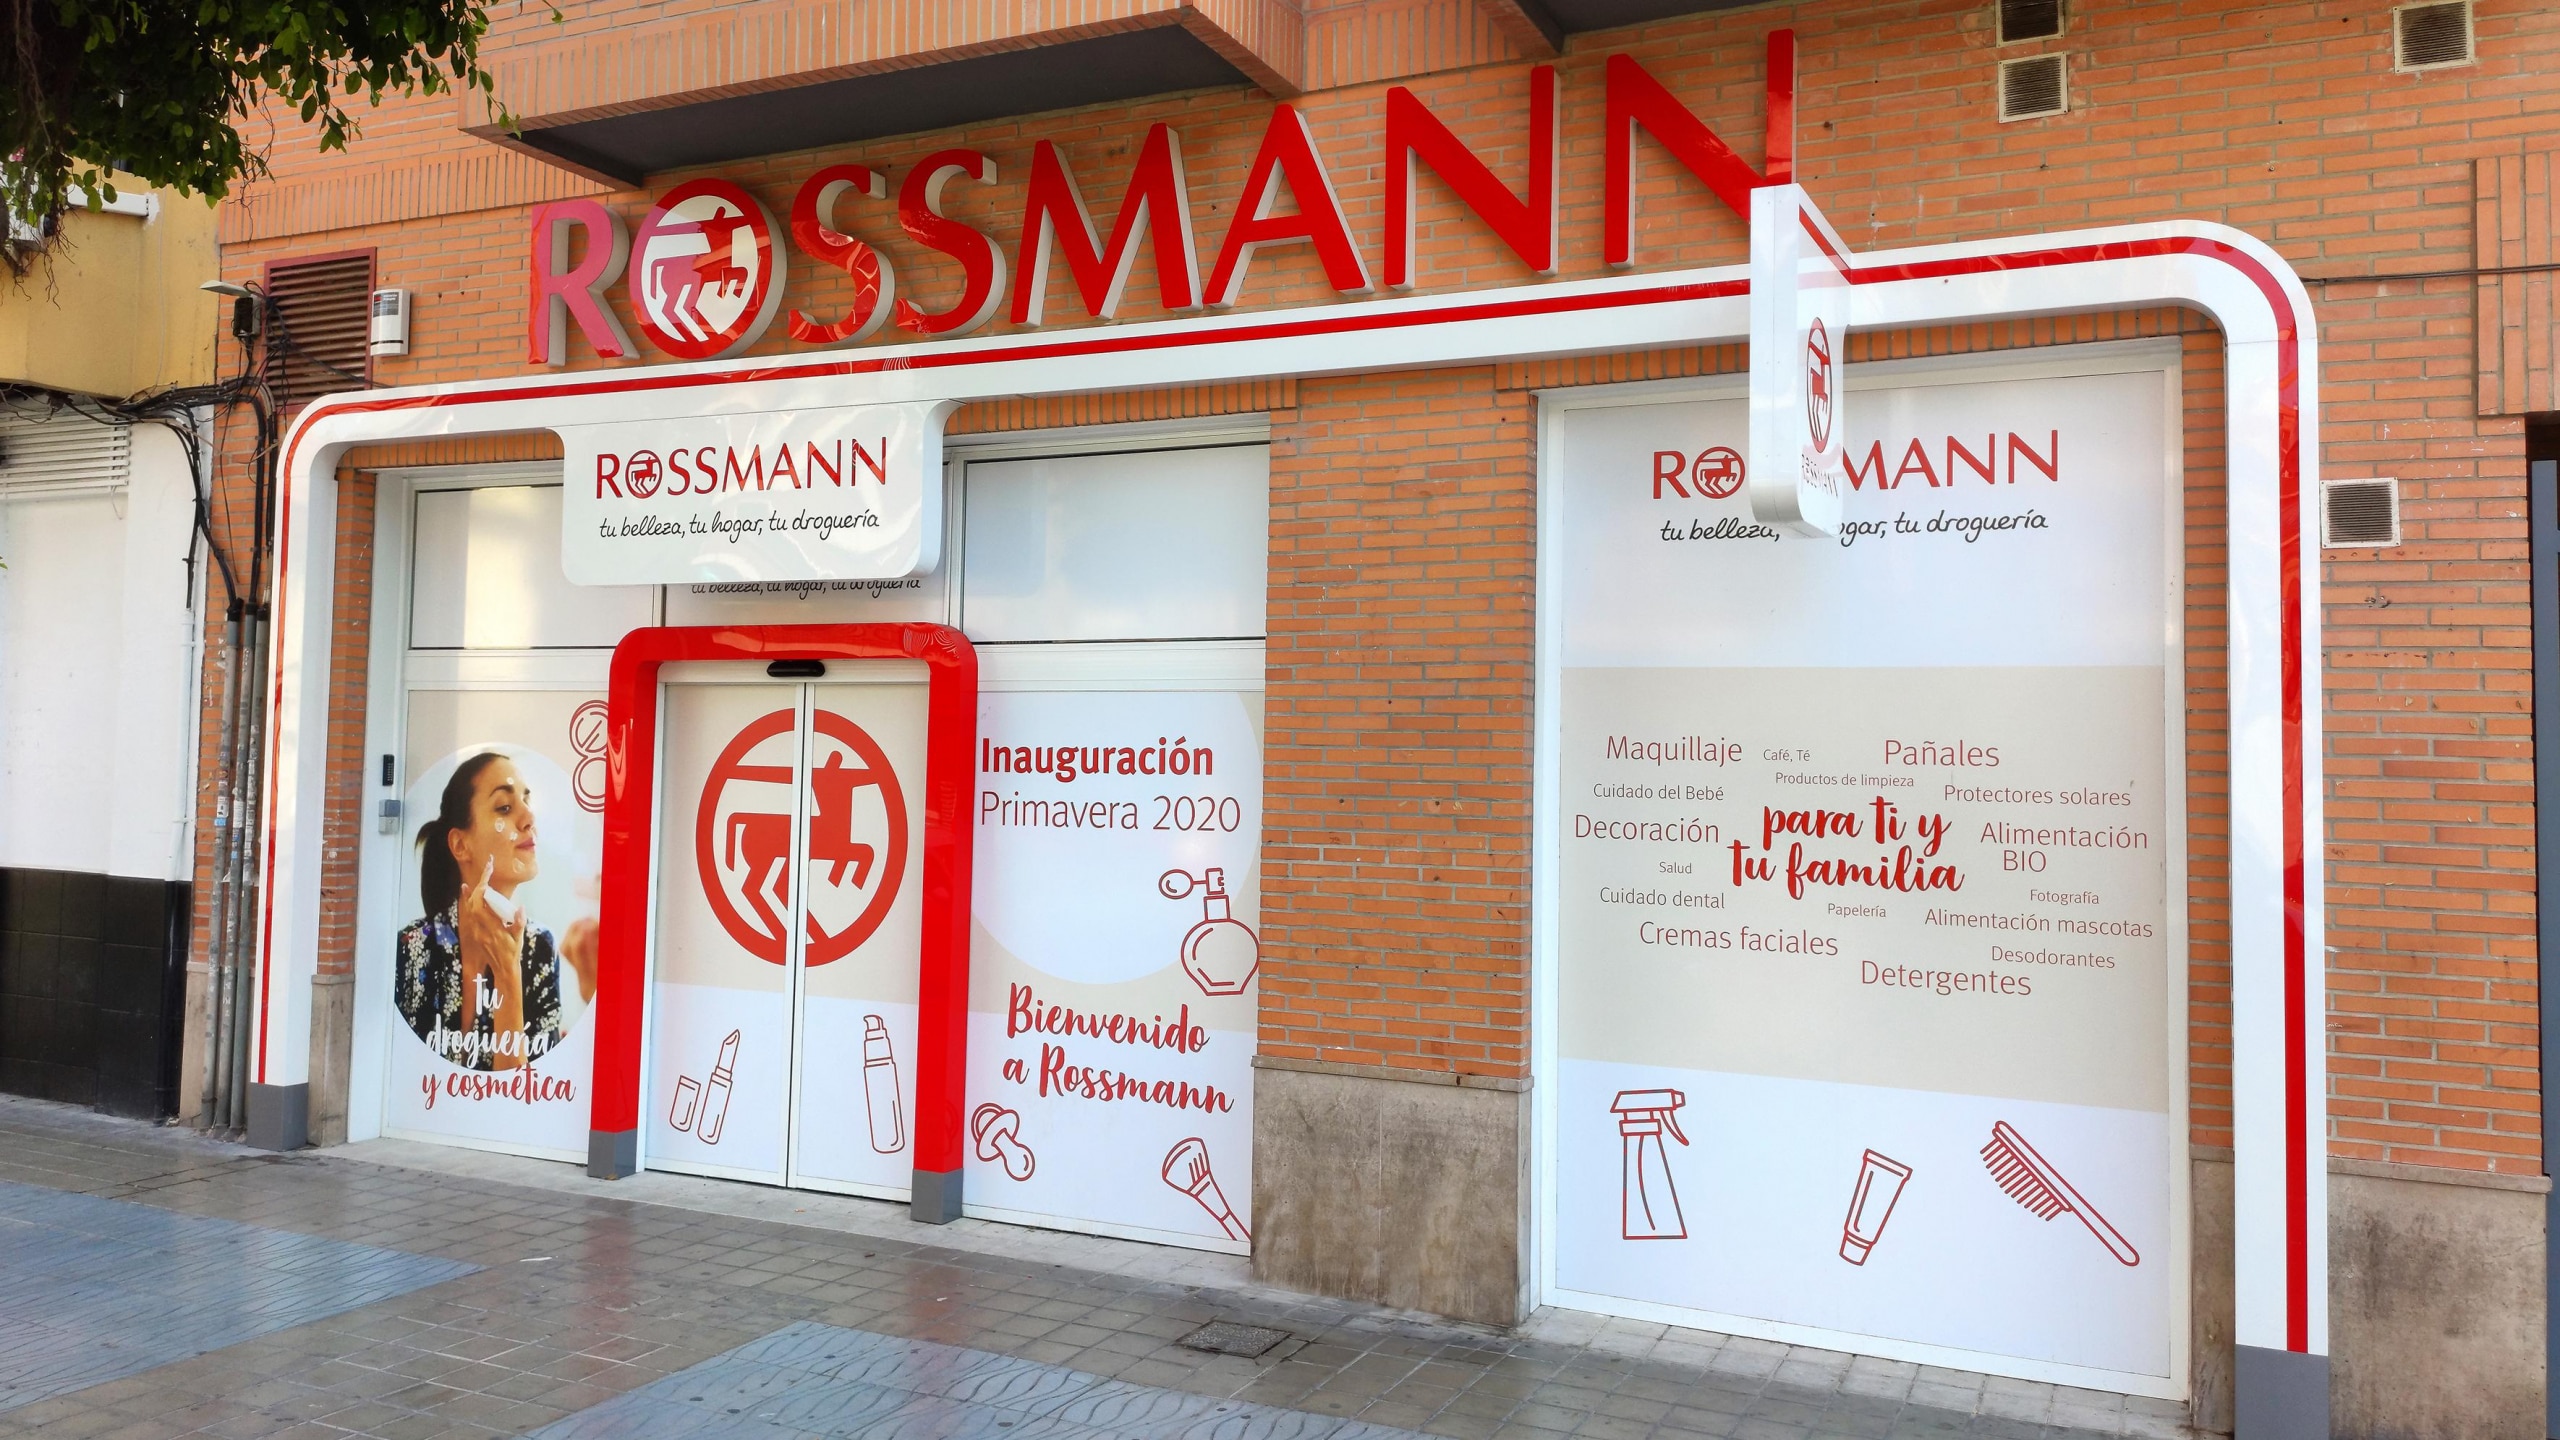 Rossmann Opens its First Store in Mallorca, Spain